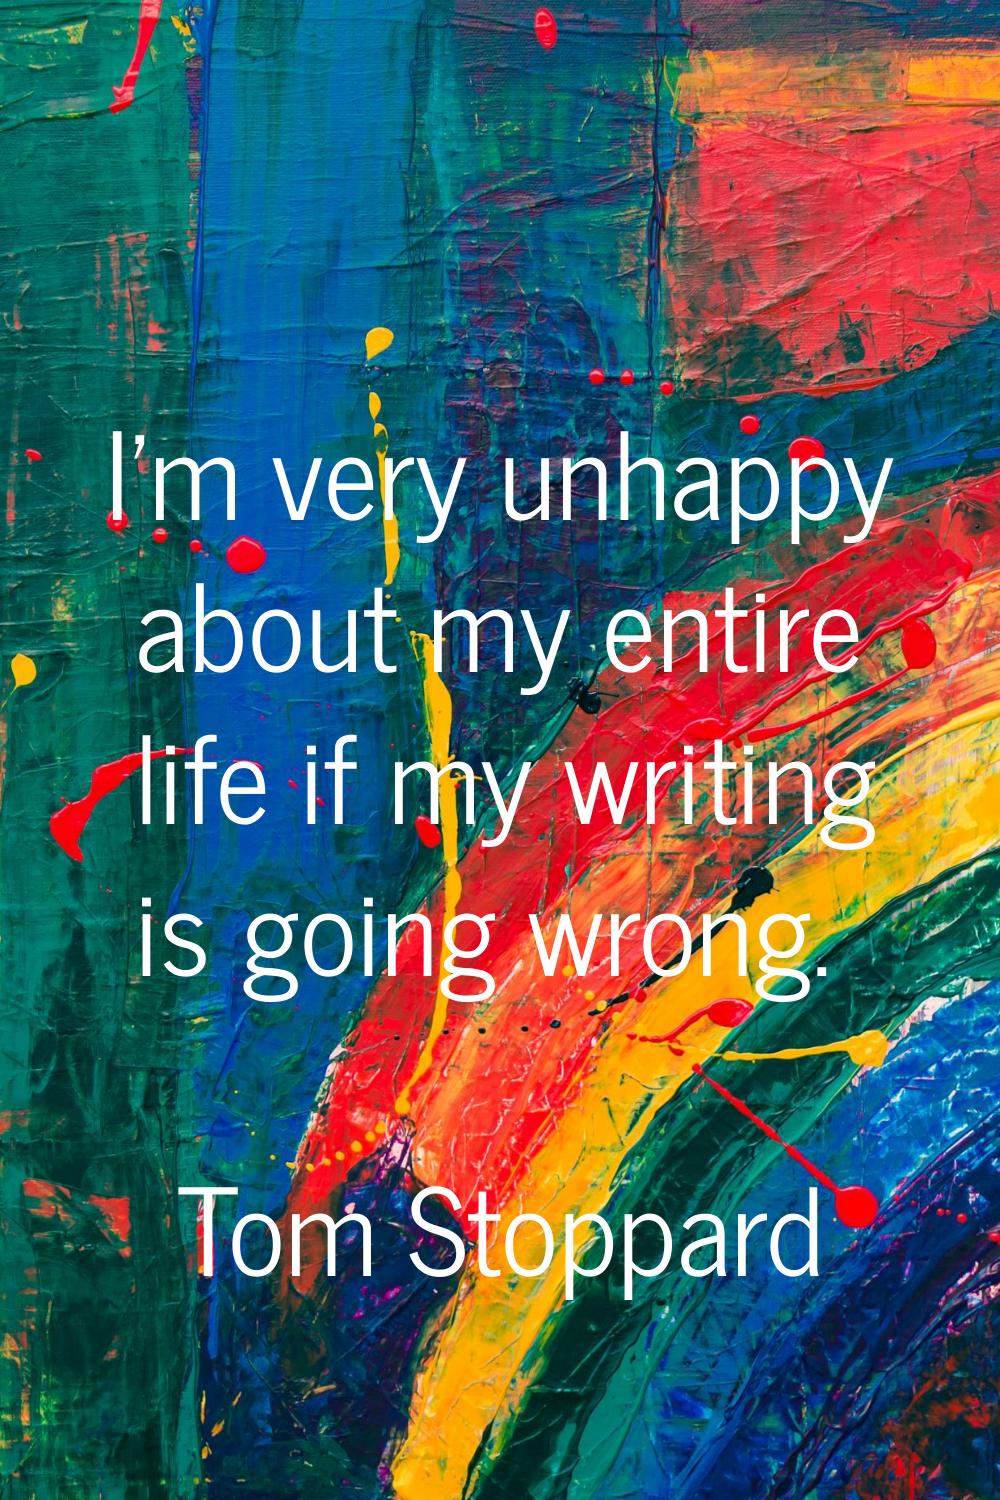 I'm very unhappy about my entire life if my writing is going wrong.